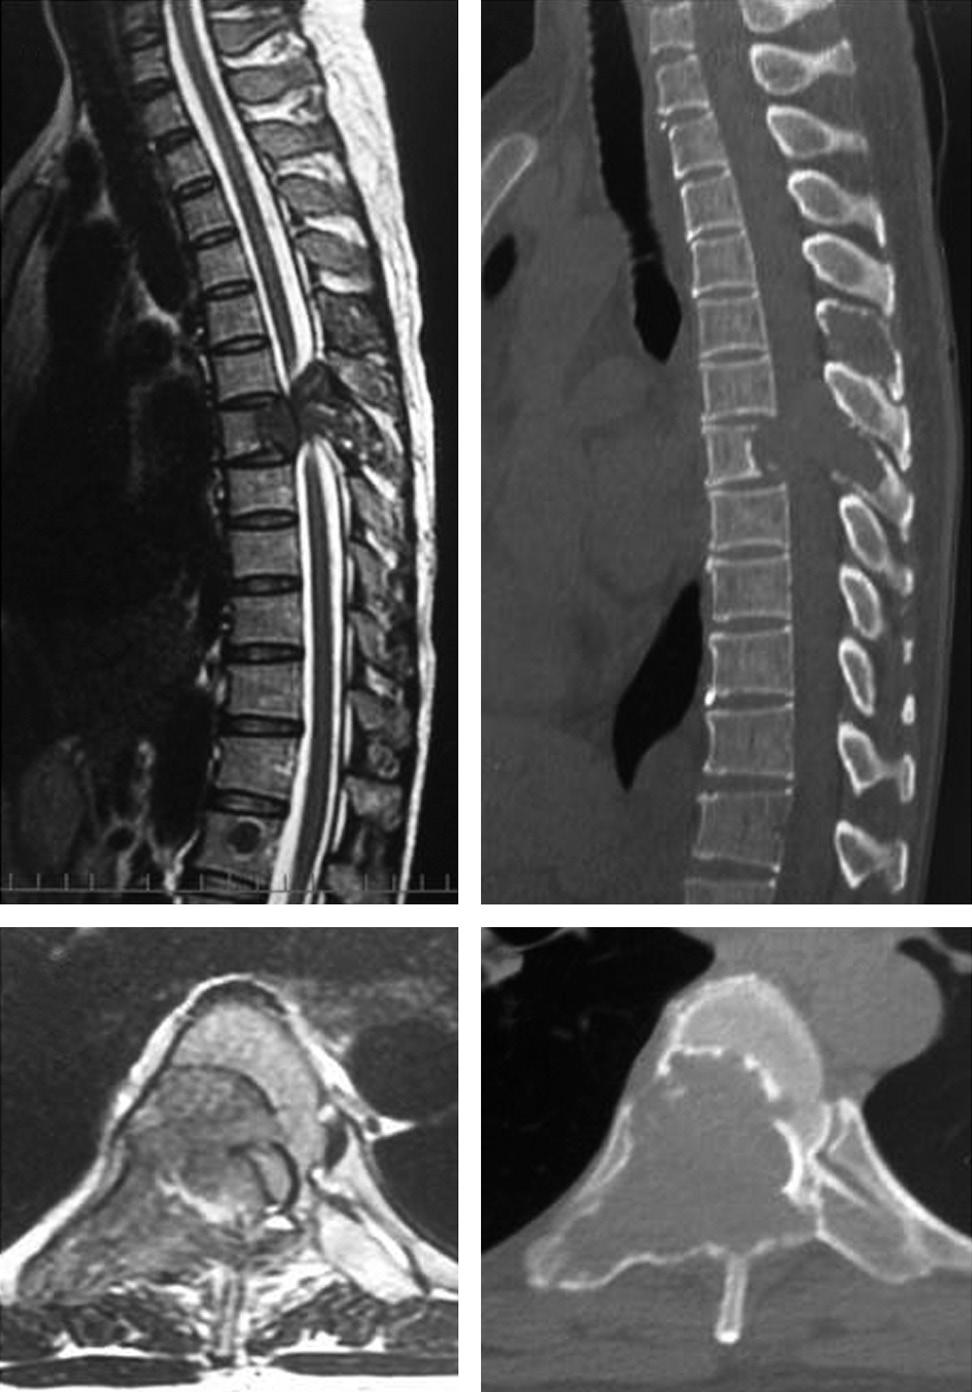 282 Kazuyoshi Kobayashi et al. Asian Spine J 2015;9(2):281-285 Case Report At 39-years-of-age, a woman was incidentally diagnosed with struma ovarii after a surgical procedure for ovarian torsion.